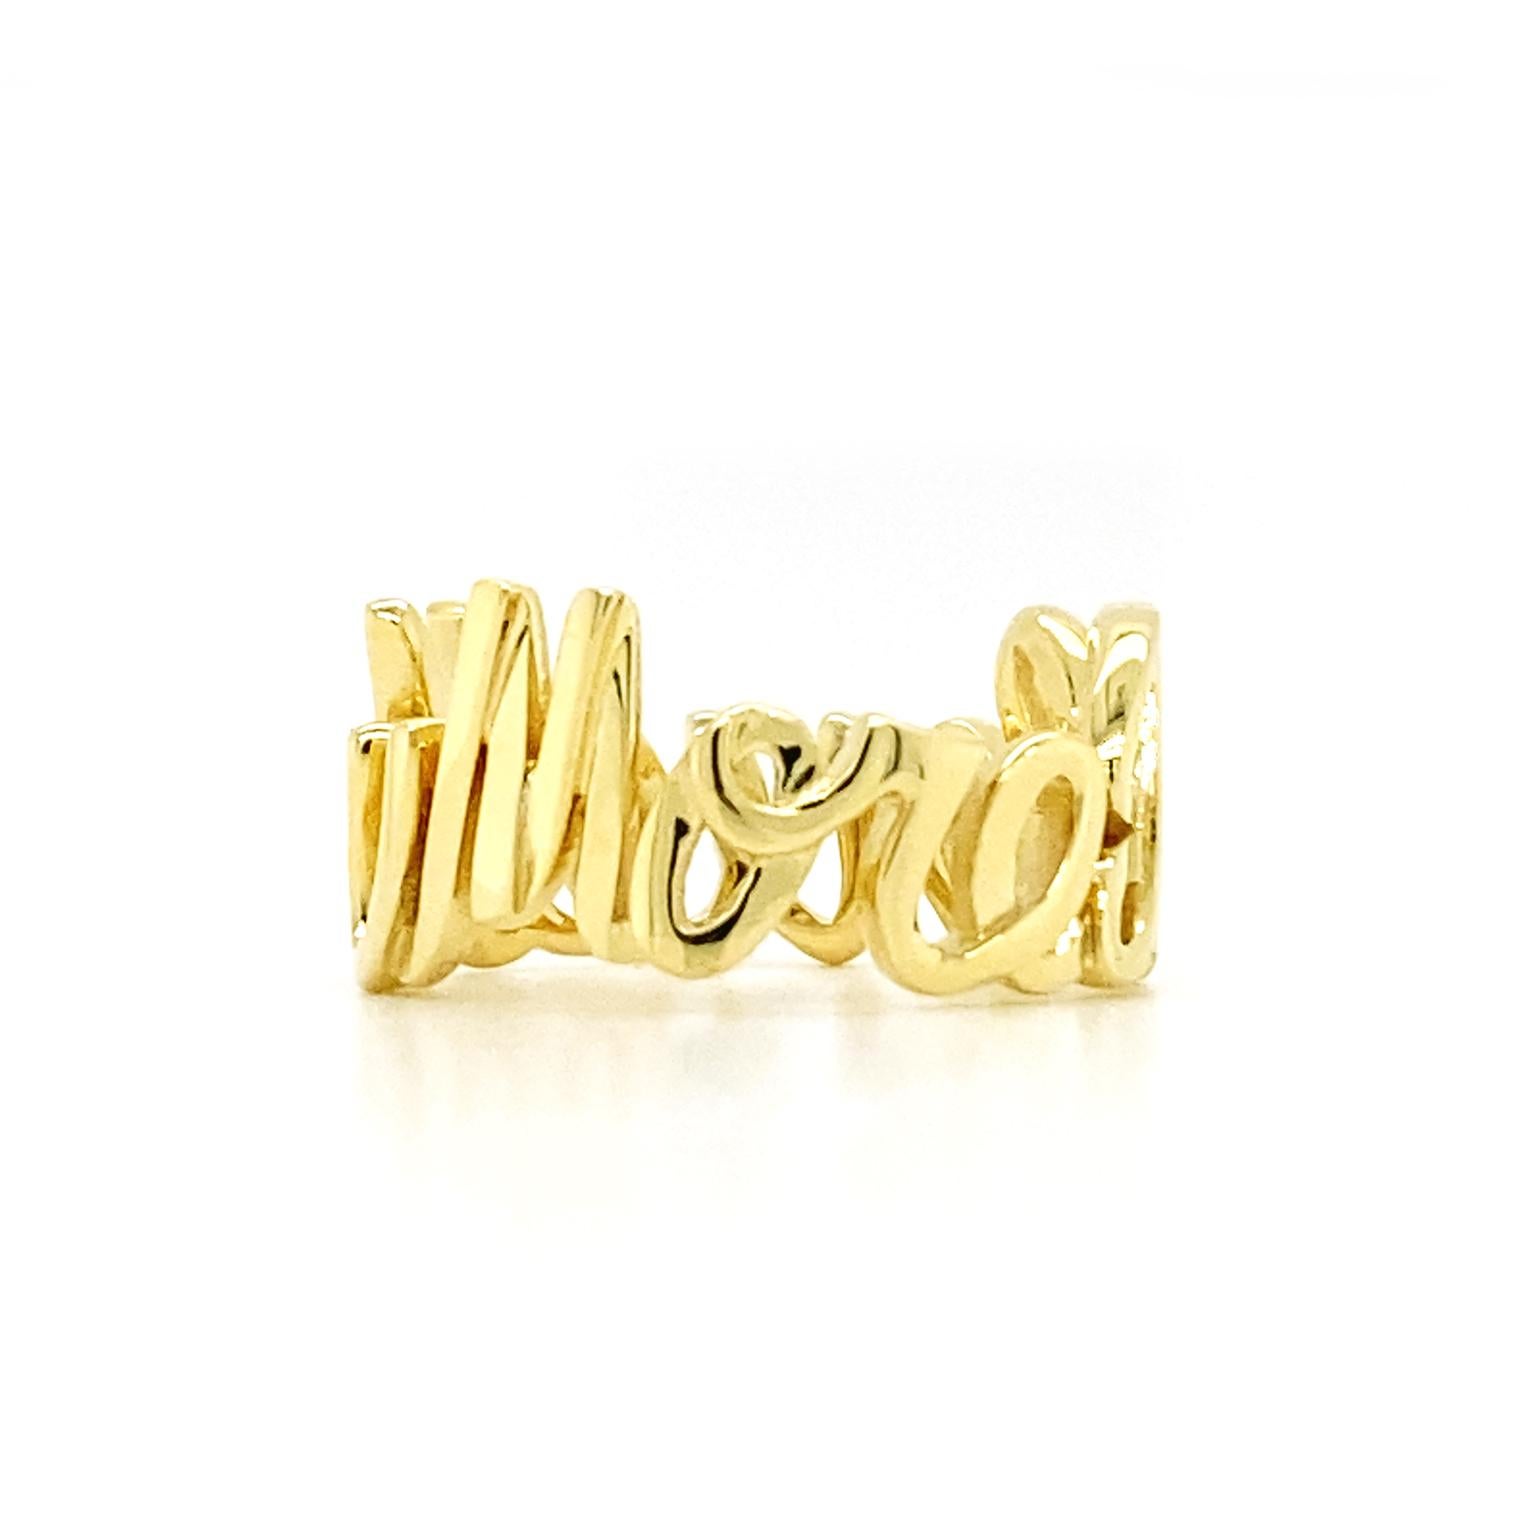 Vivid gold script bounds this ring. 18k yellow gold forms openwork cursive letters measuring 9.75mm tall to spell the message I Love You More. The romantic phrase rotates to form the polished band. Measurements for the ring are 0.82 inches (width)